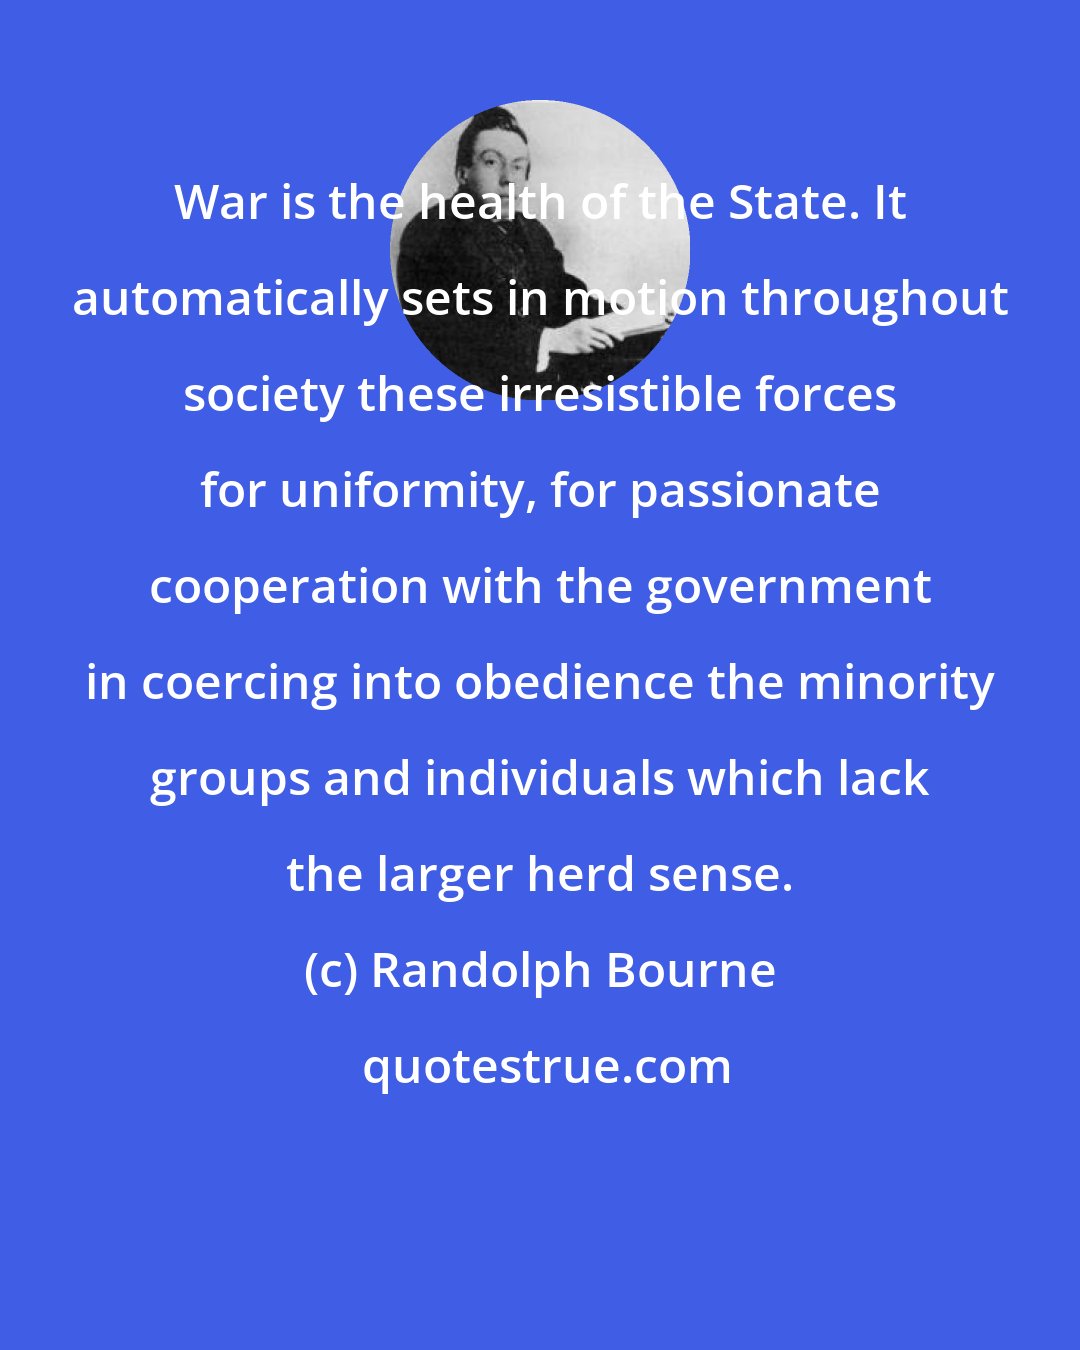 Randolph Bourne: War is the health of the State. It automatically sets in motion throughout society these irresistible forces for uniformity, for passionate cooperation with the government in coercing into obedience the minority groups and individuals which lack the larger herd sense.